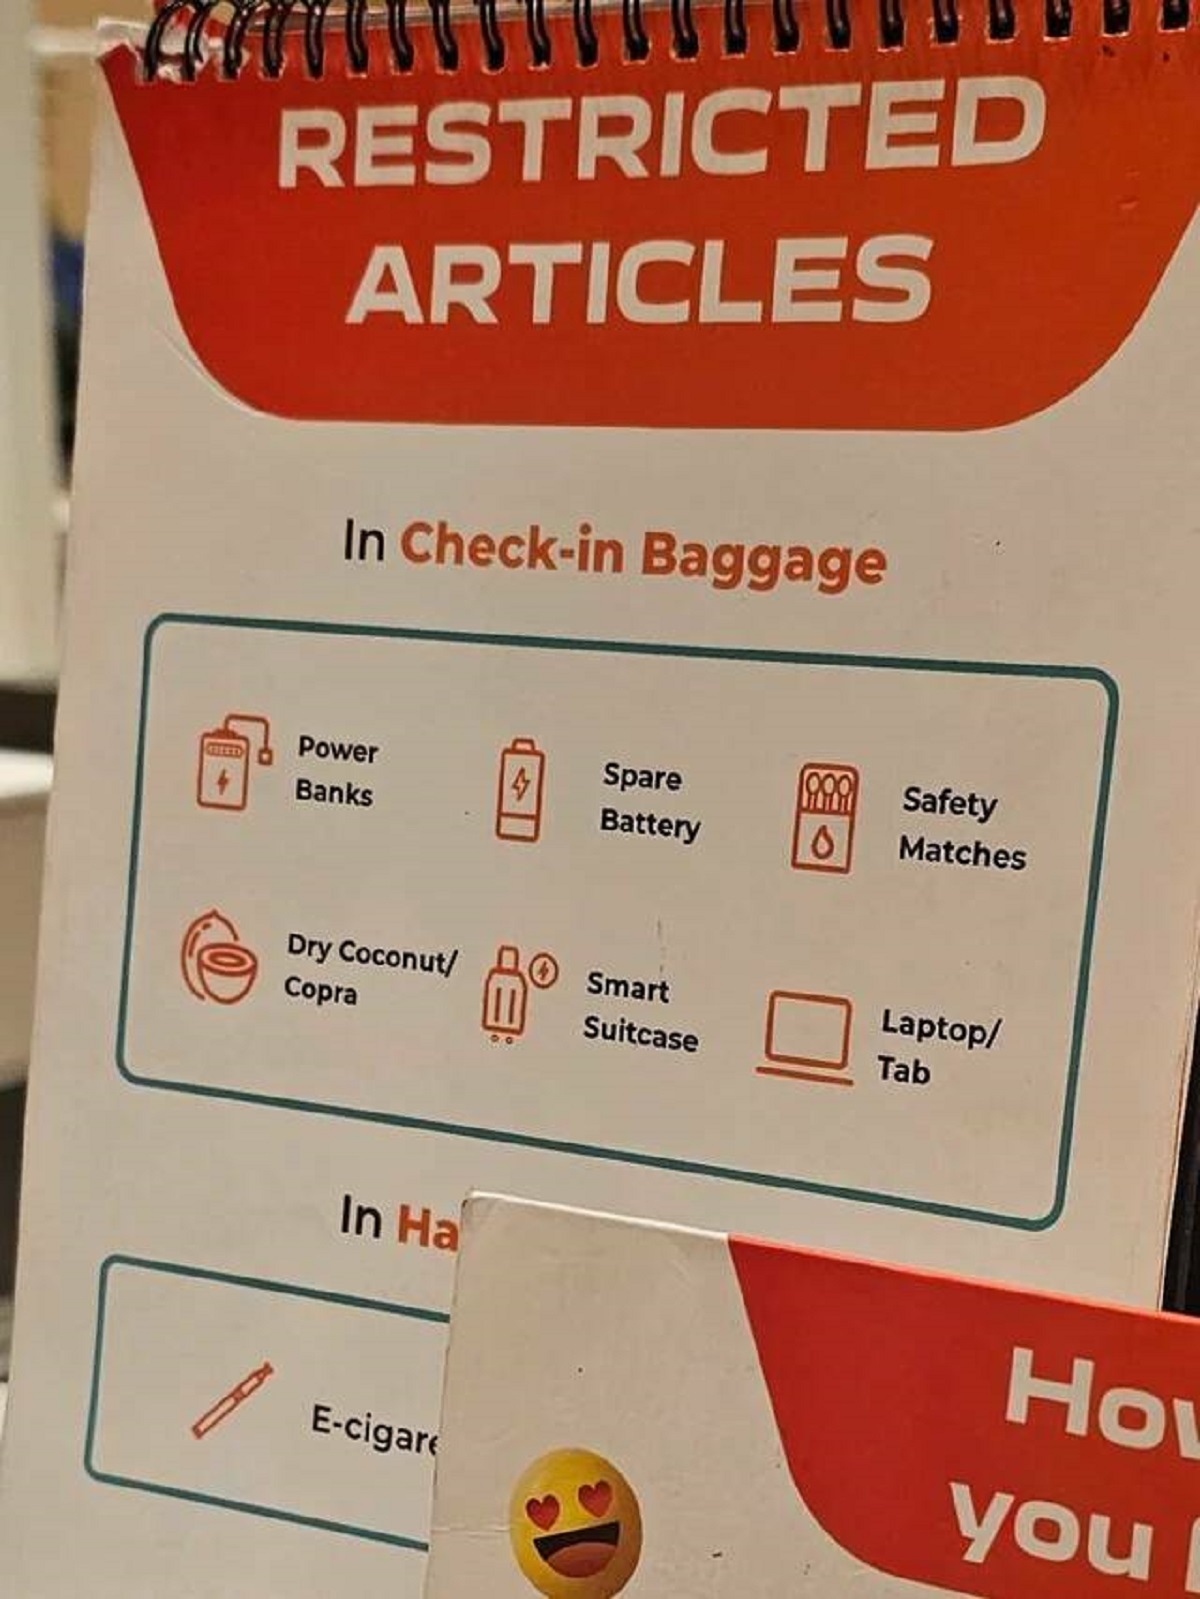 signage - Cheee Restricted Articles In Checkin Baggage Power Banks Dry Coconut Copra In Ha Ecigare 11 Spare Battery Smart Suitcase 000 Bibibit Safety 0 Matches Laptop Tab Ho you